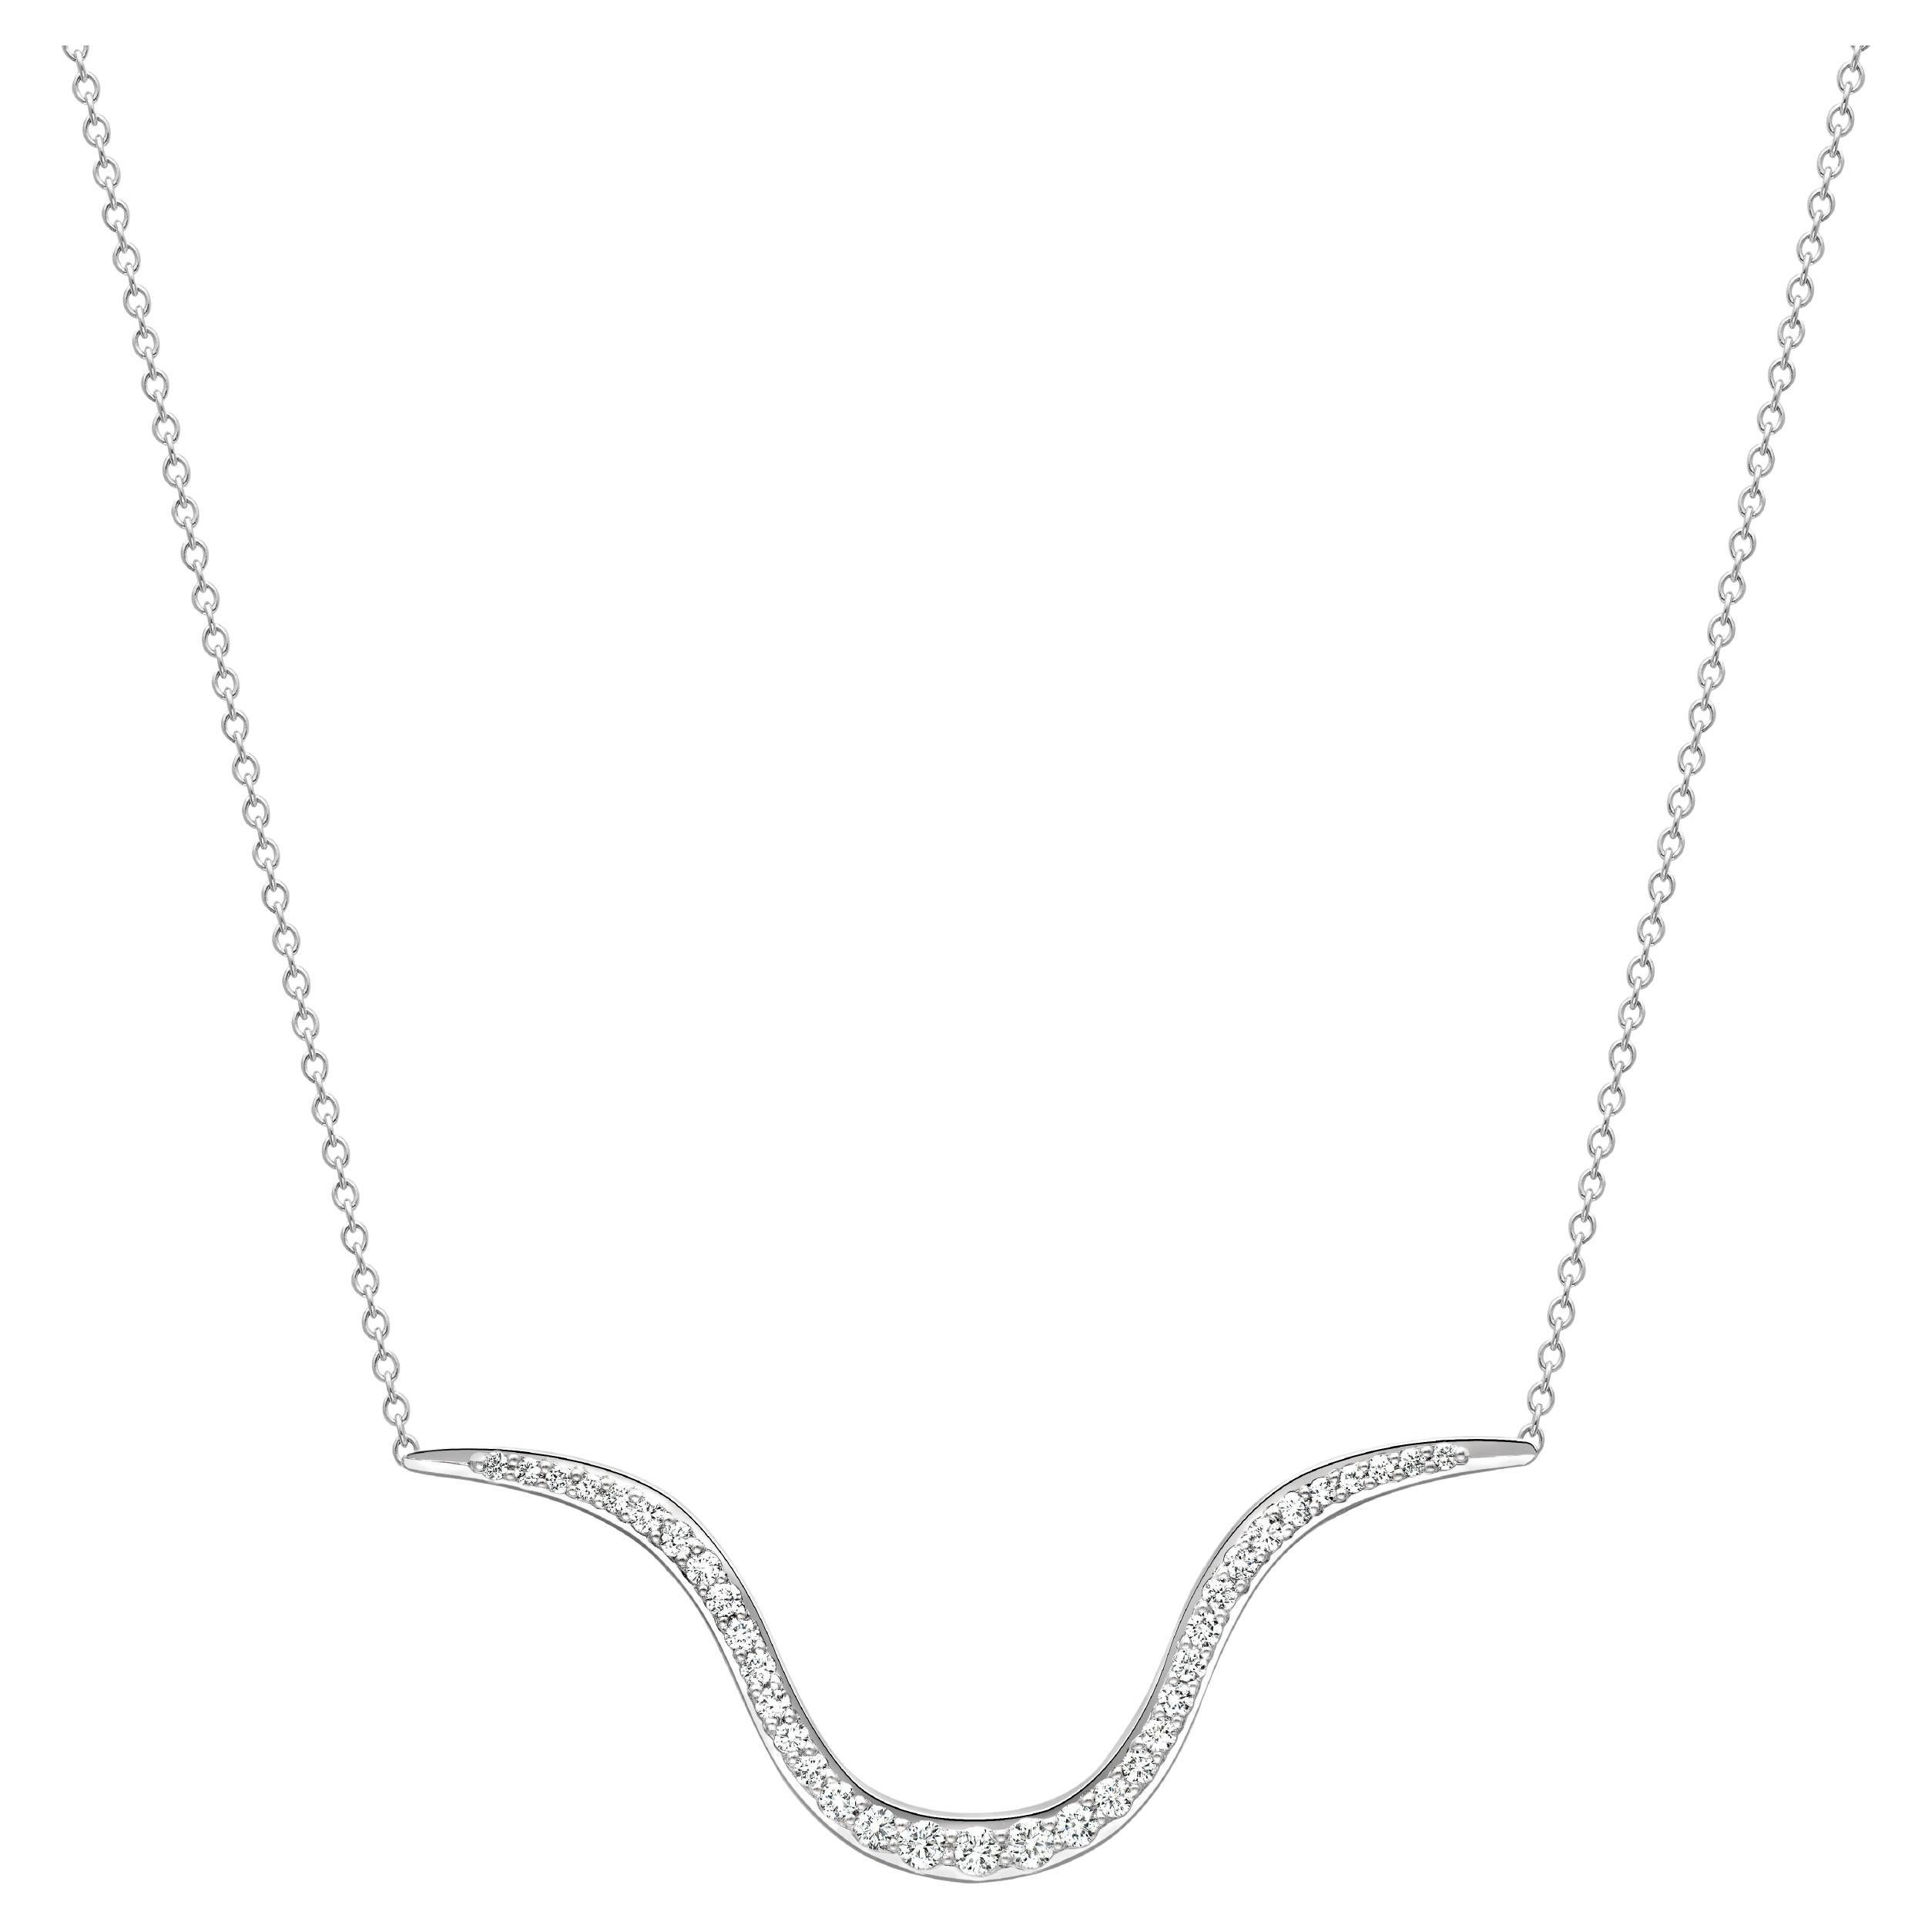 CONTOUR PENDANT White gold with white diamonds by Liv Luttrell